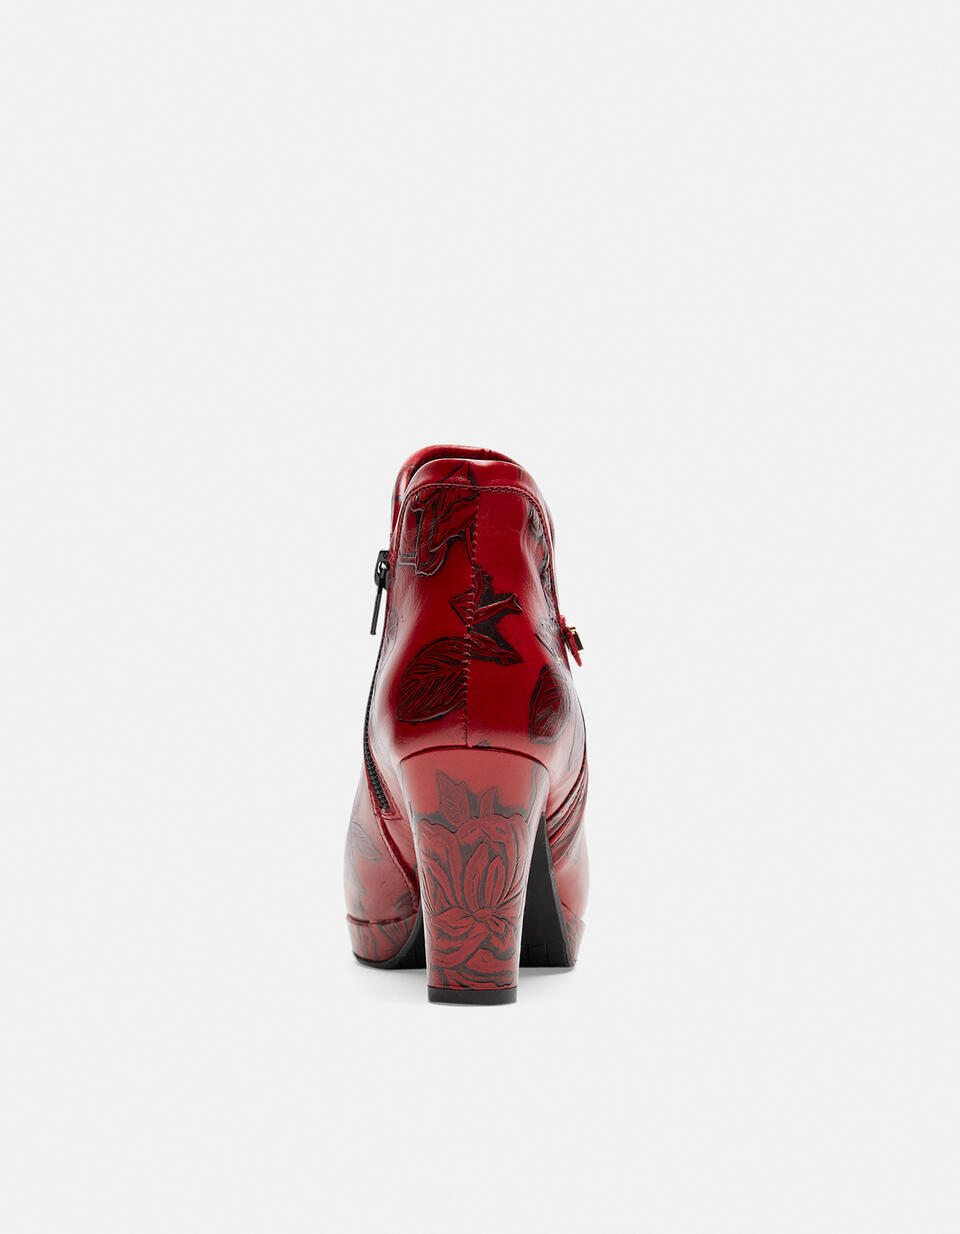 Mimi ankle boots ROSSO  - Women Shoes - Shoes - Cuoieria Fiorentina